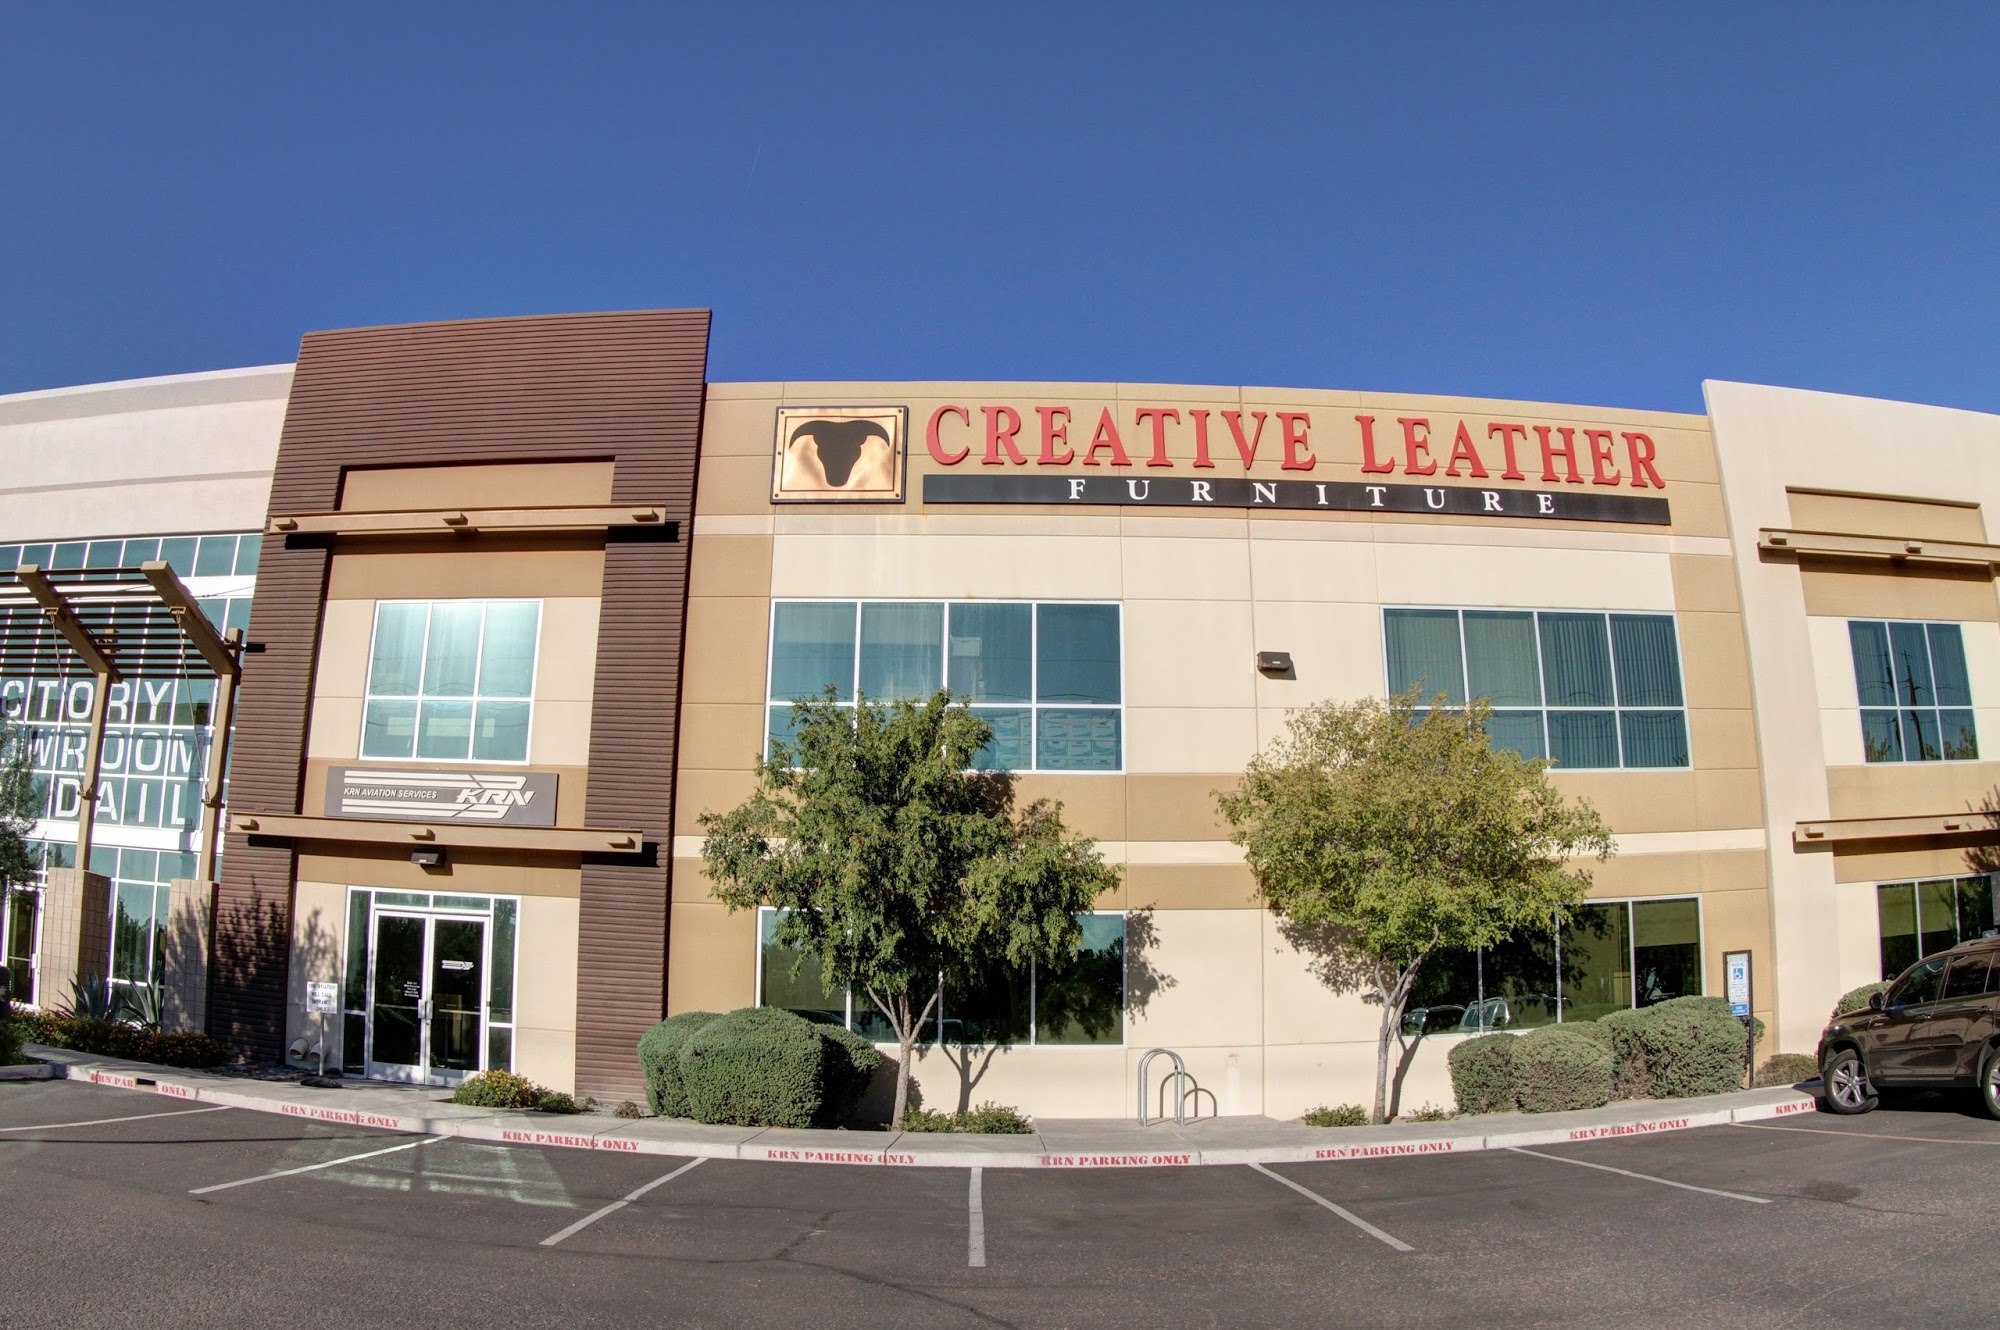 Creative Leather Furniture, Chandler